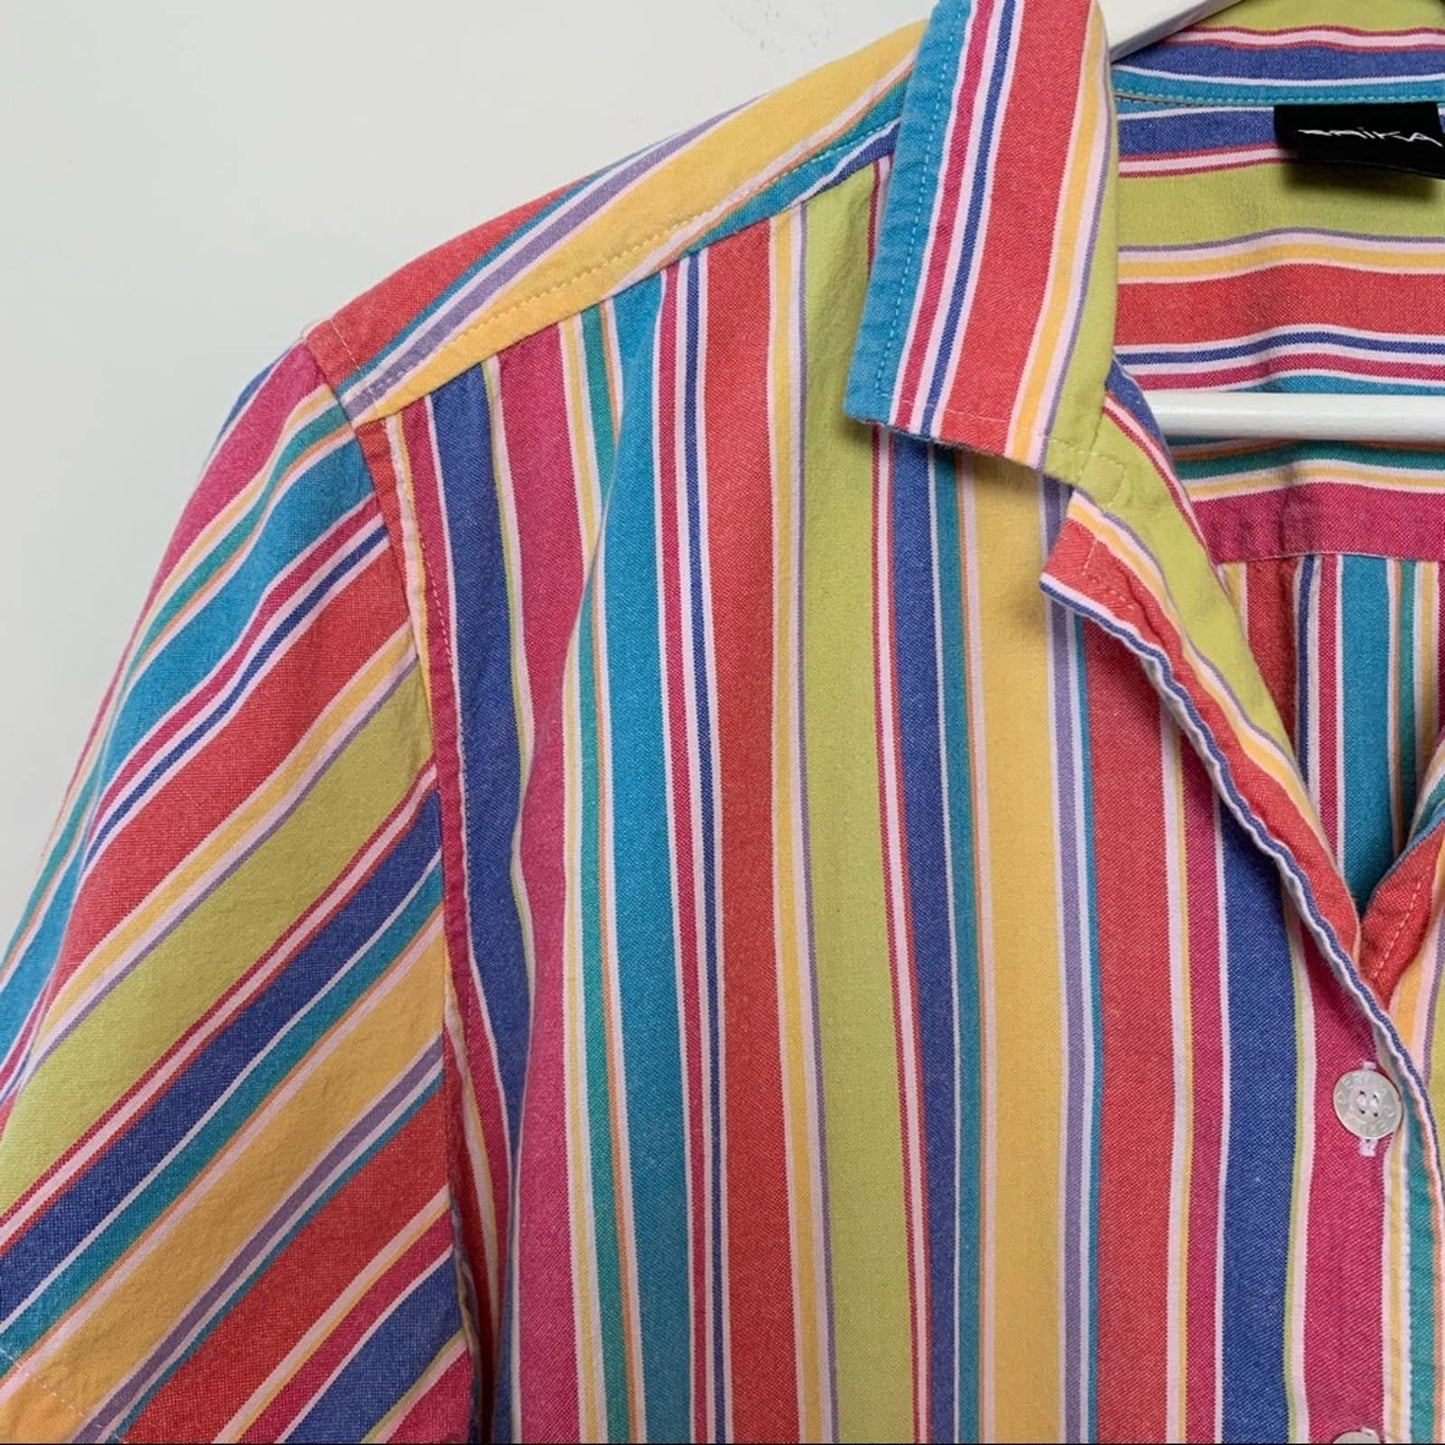 Vintage 90s Erika Rainbow Striped Short Sleeve Button Down Collared Shirt Large